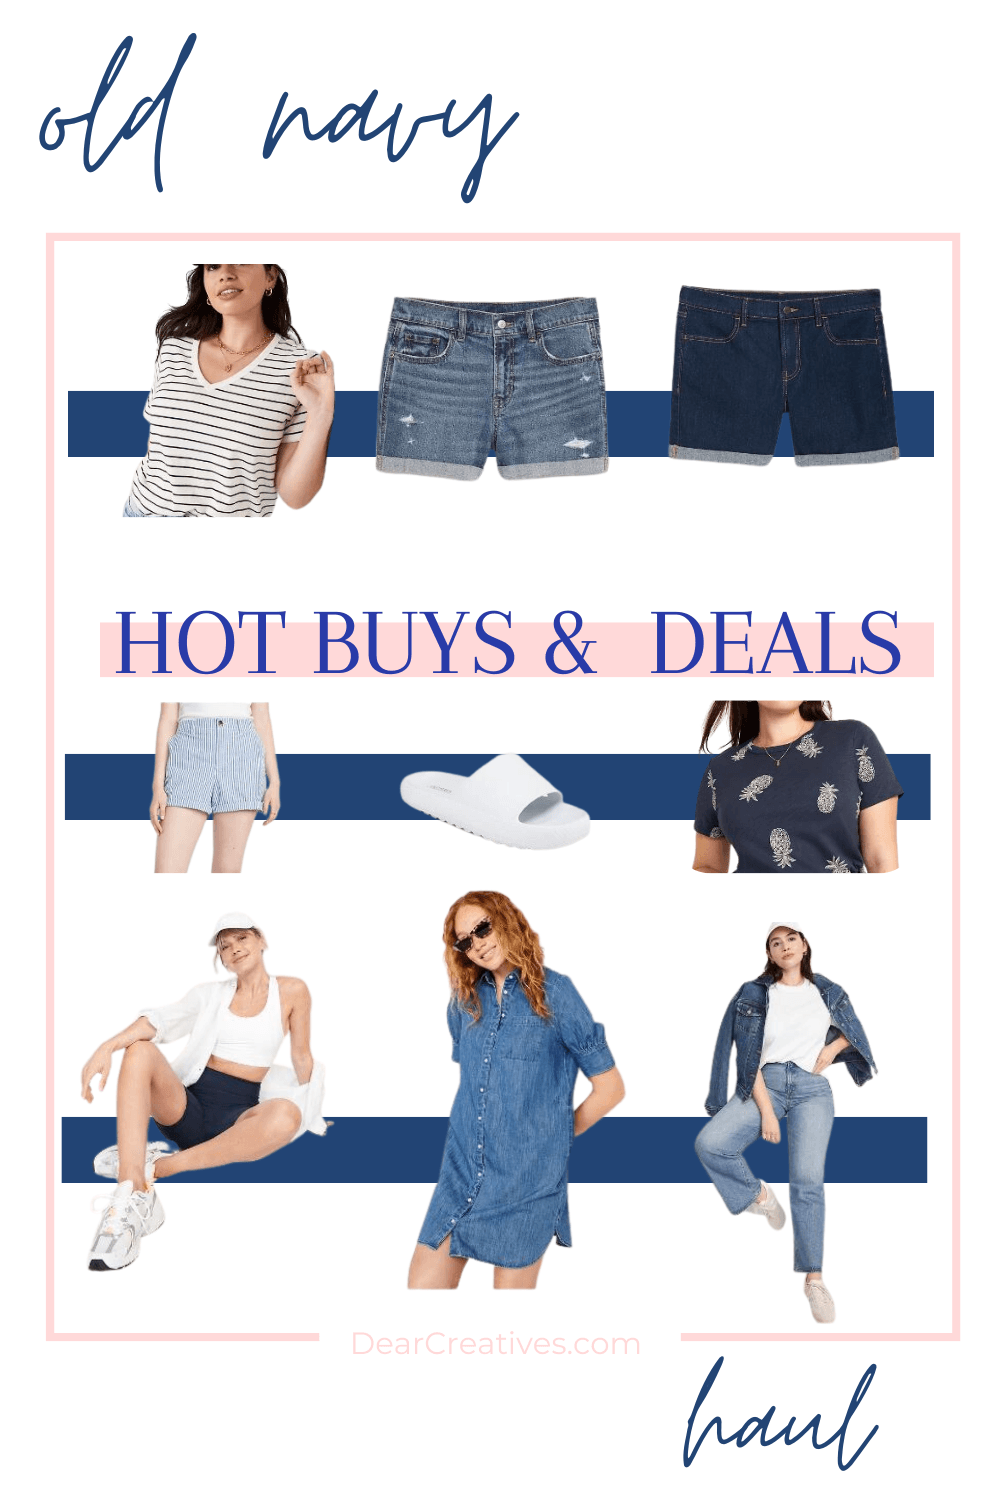 Old Navy Haul And Sale Alert – Hot Buys & Big Deals!